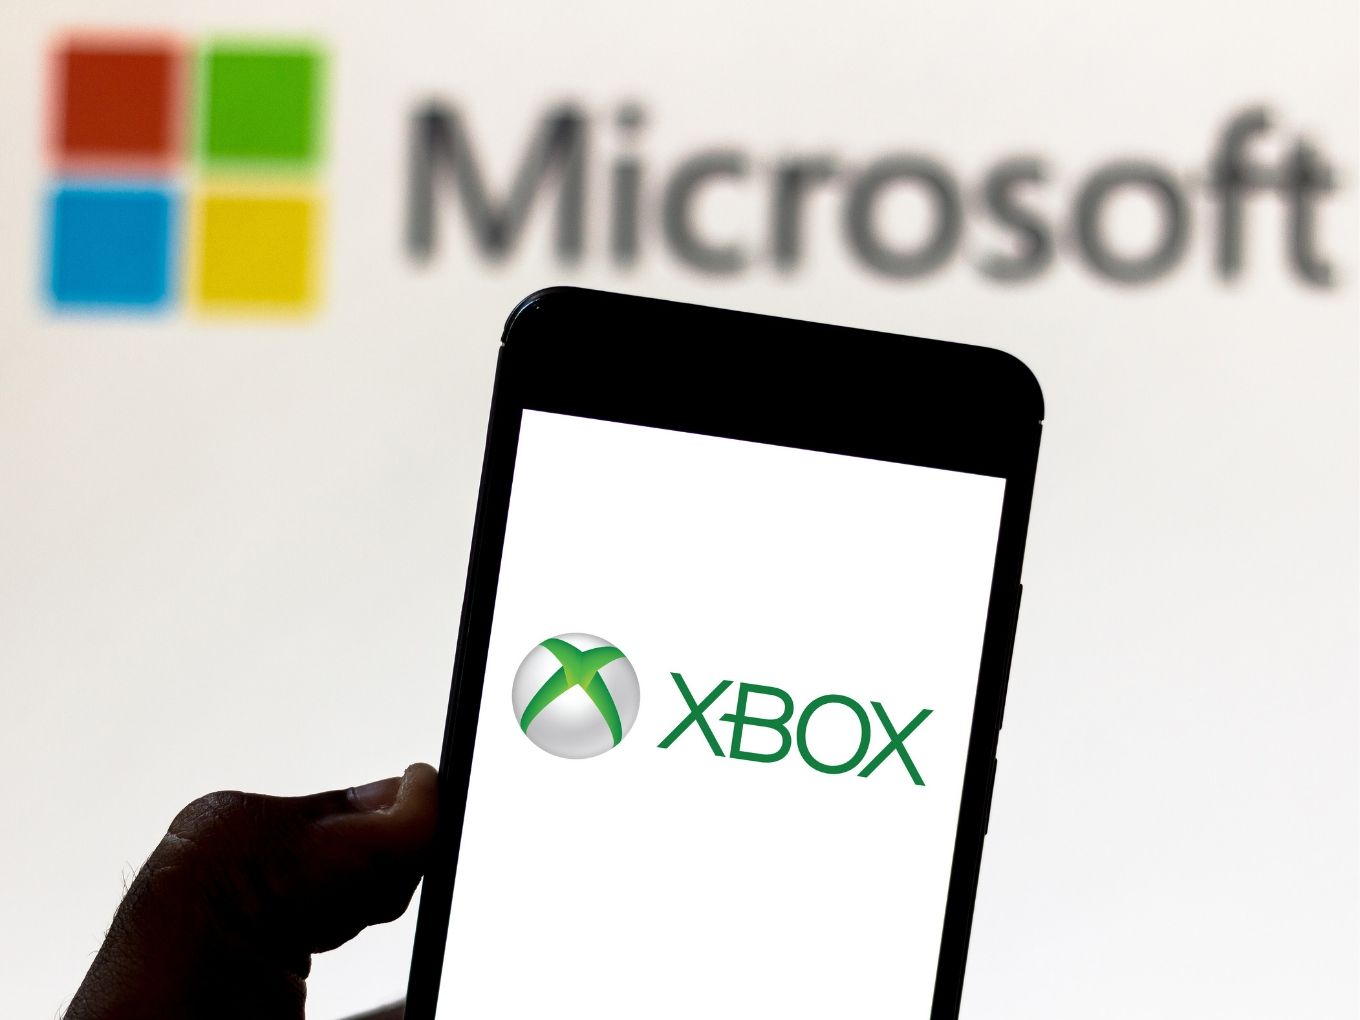 Are Your Conversations Really Private? Microsoft Accused Of Recording Audio From Xbox Users